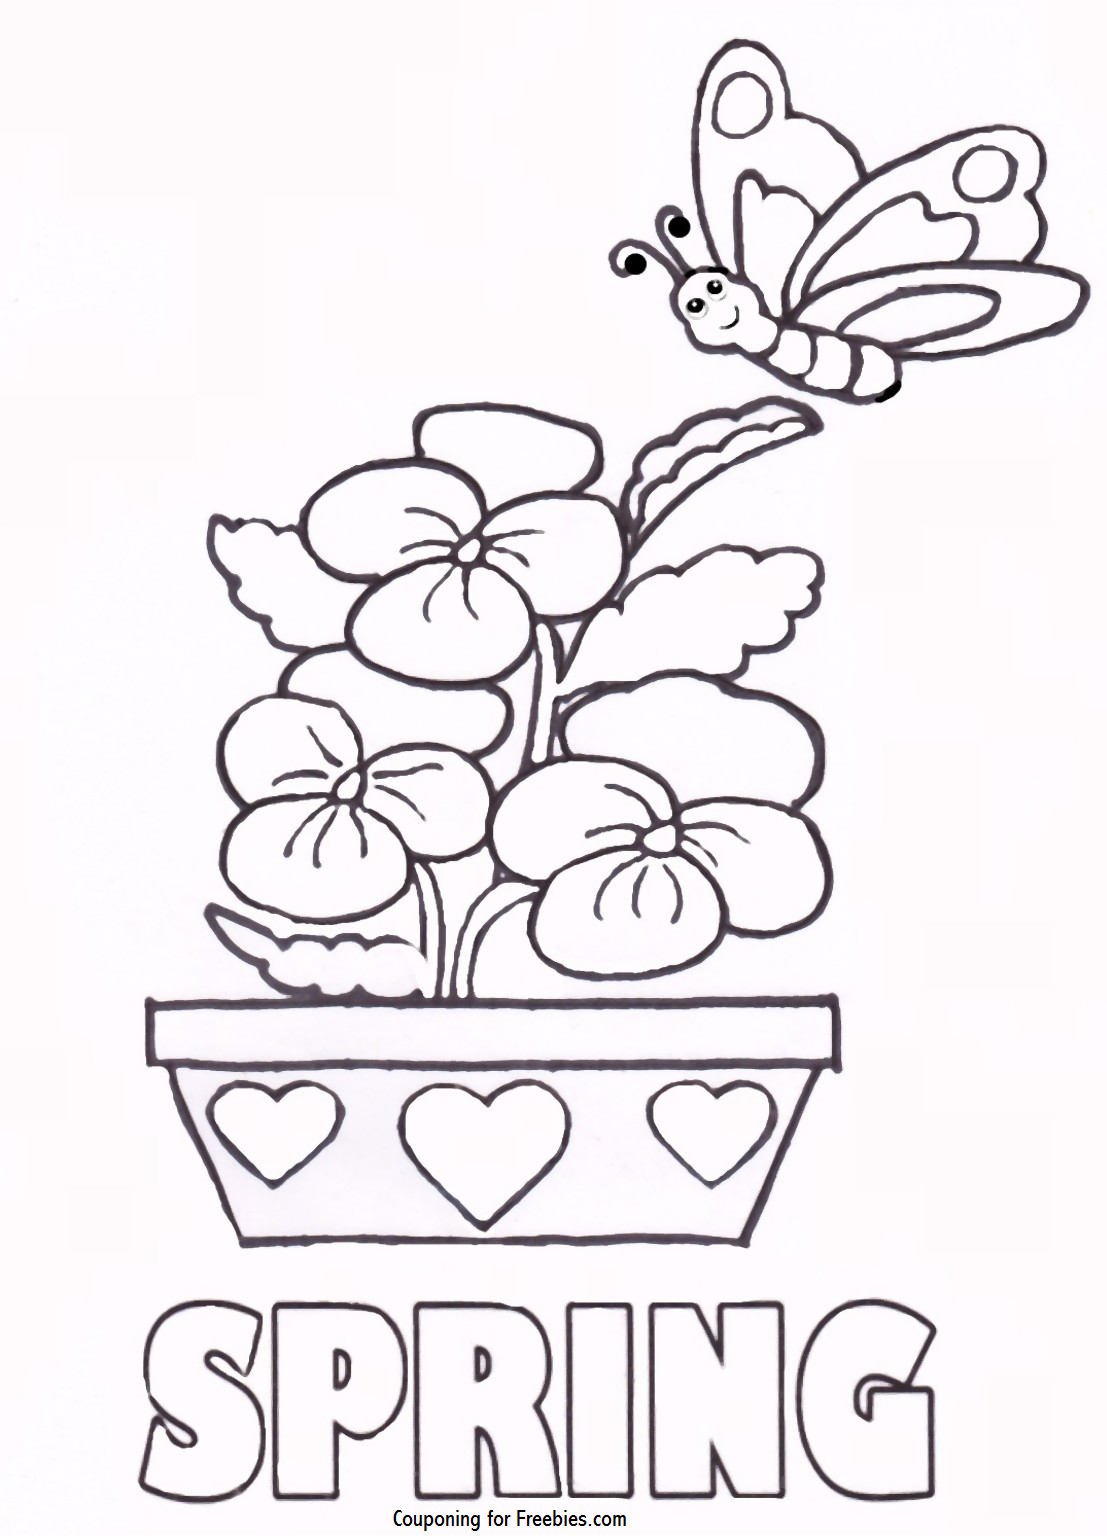 spring-coloring-page-0098-q1